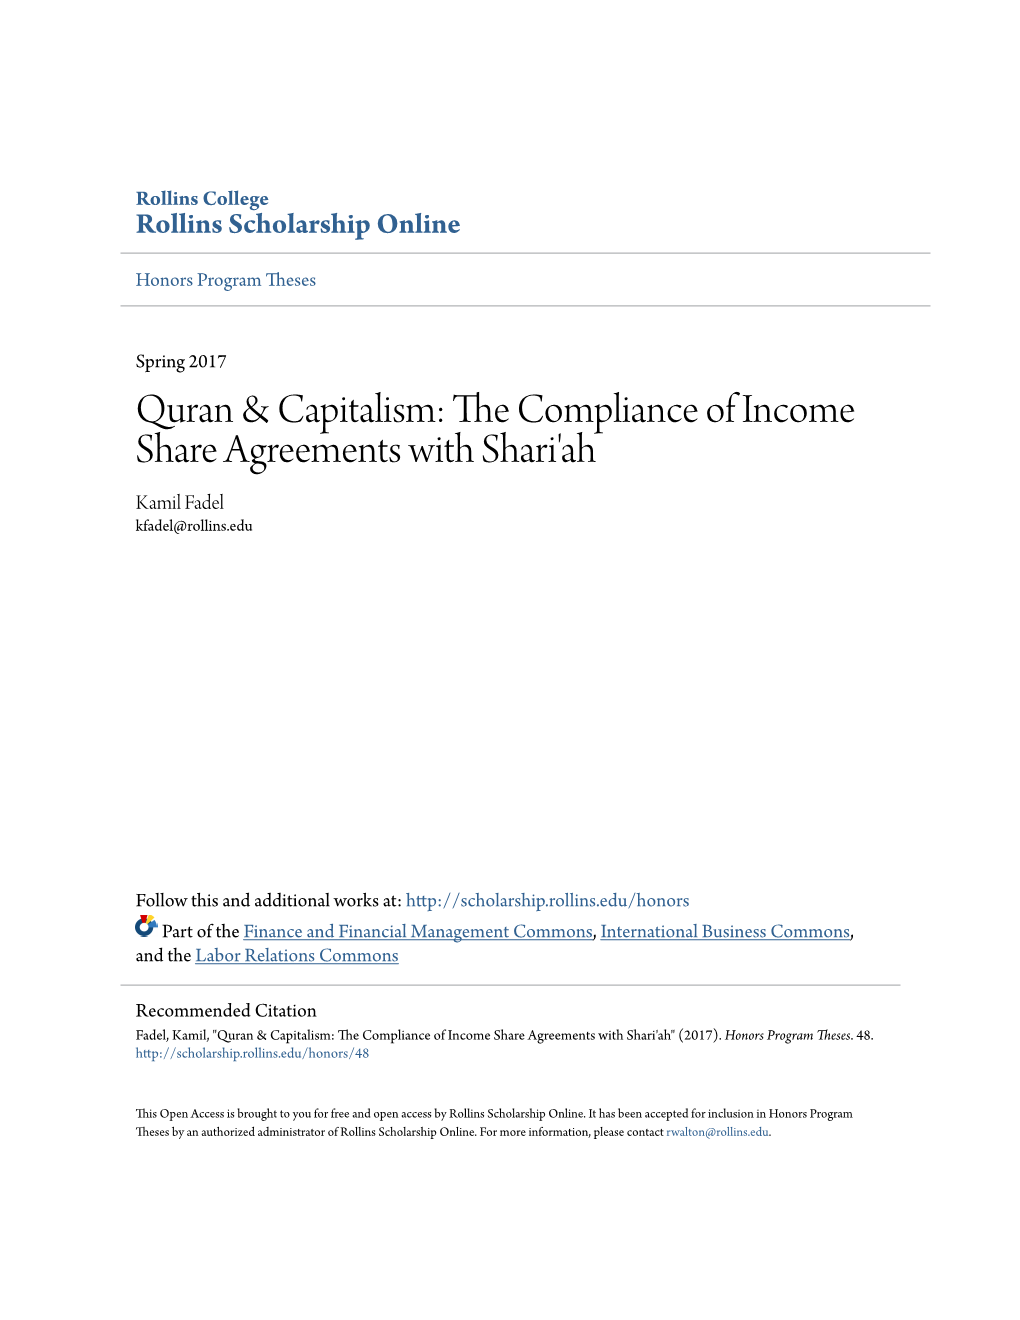 The Compliance of Income Share Agreements with Shari'ah